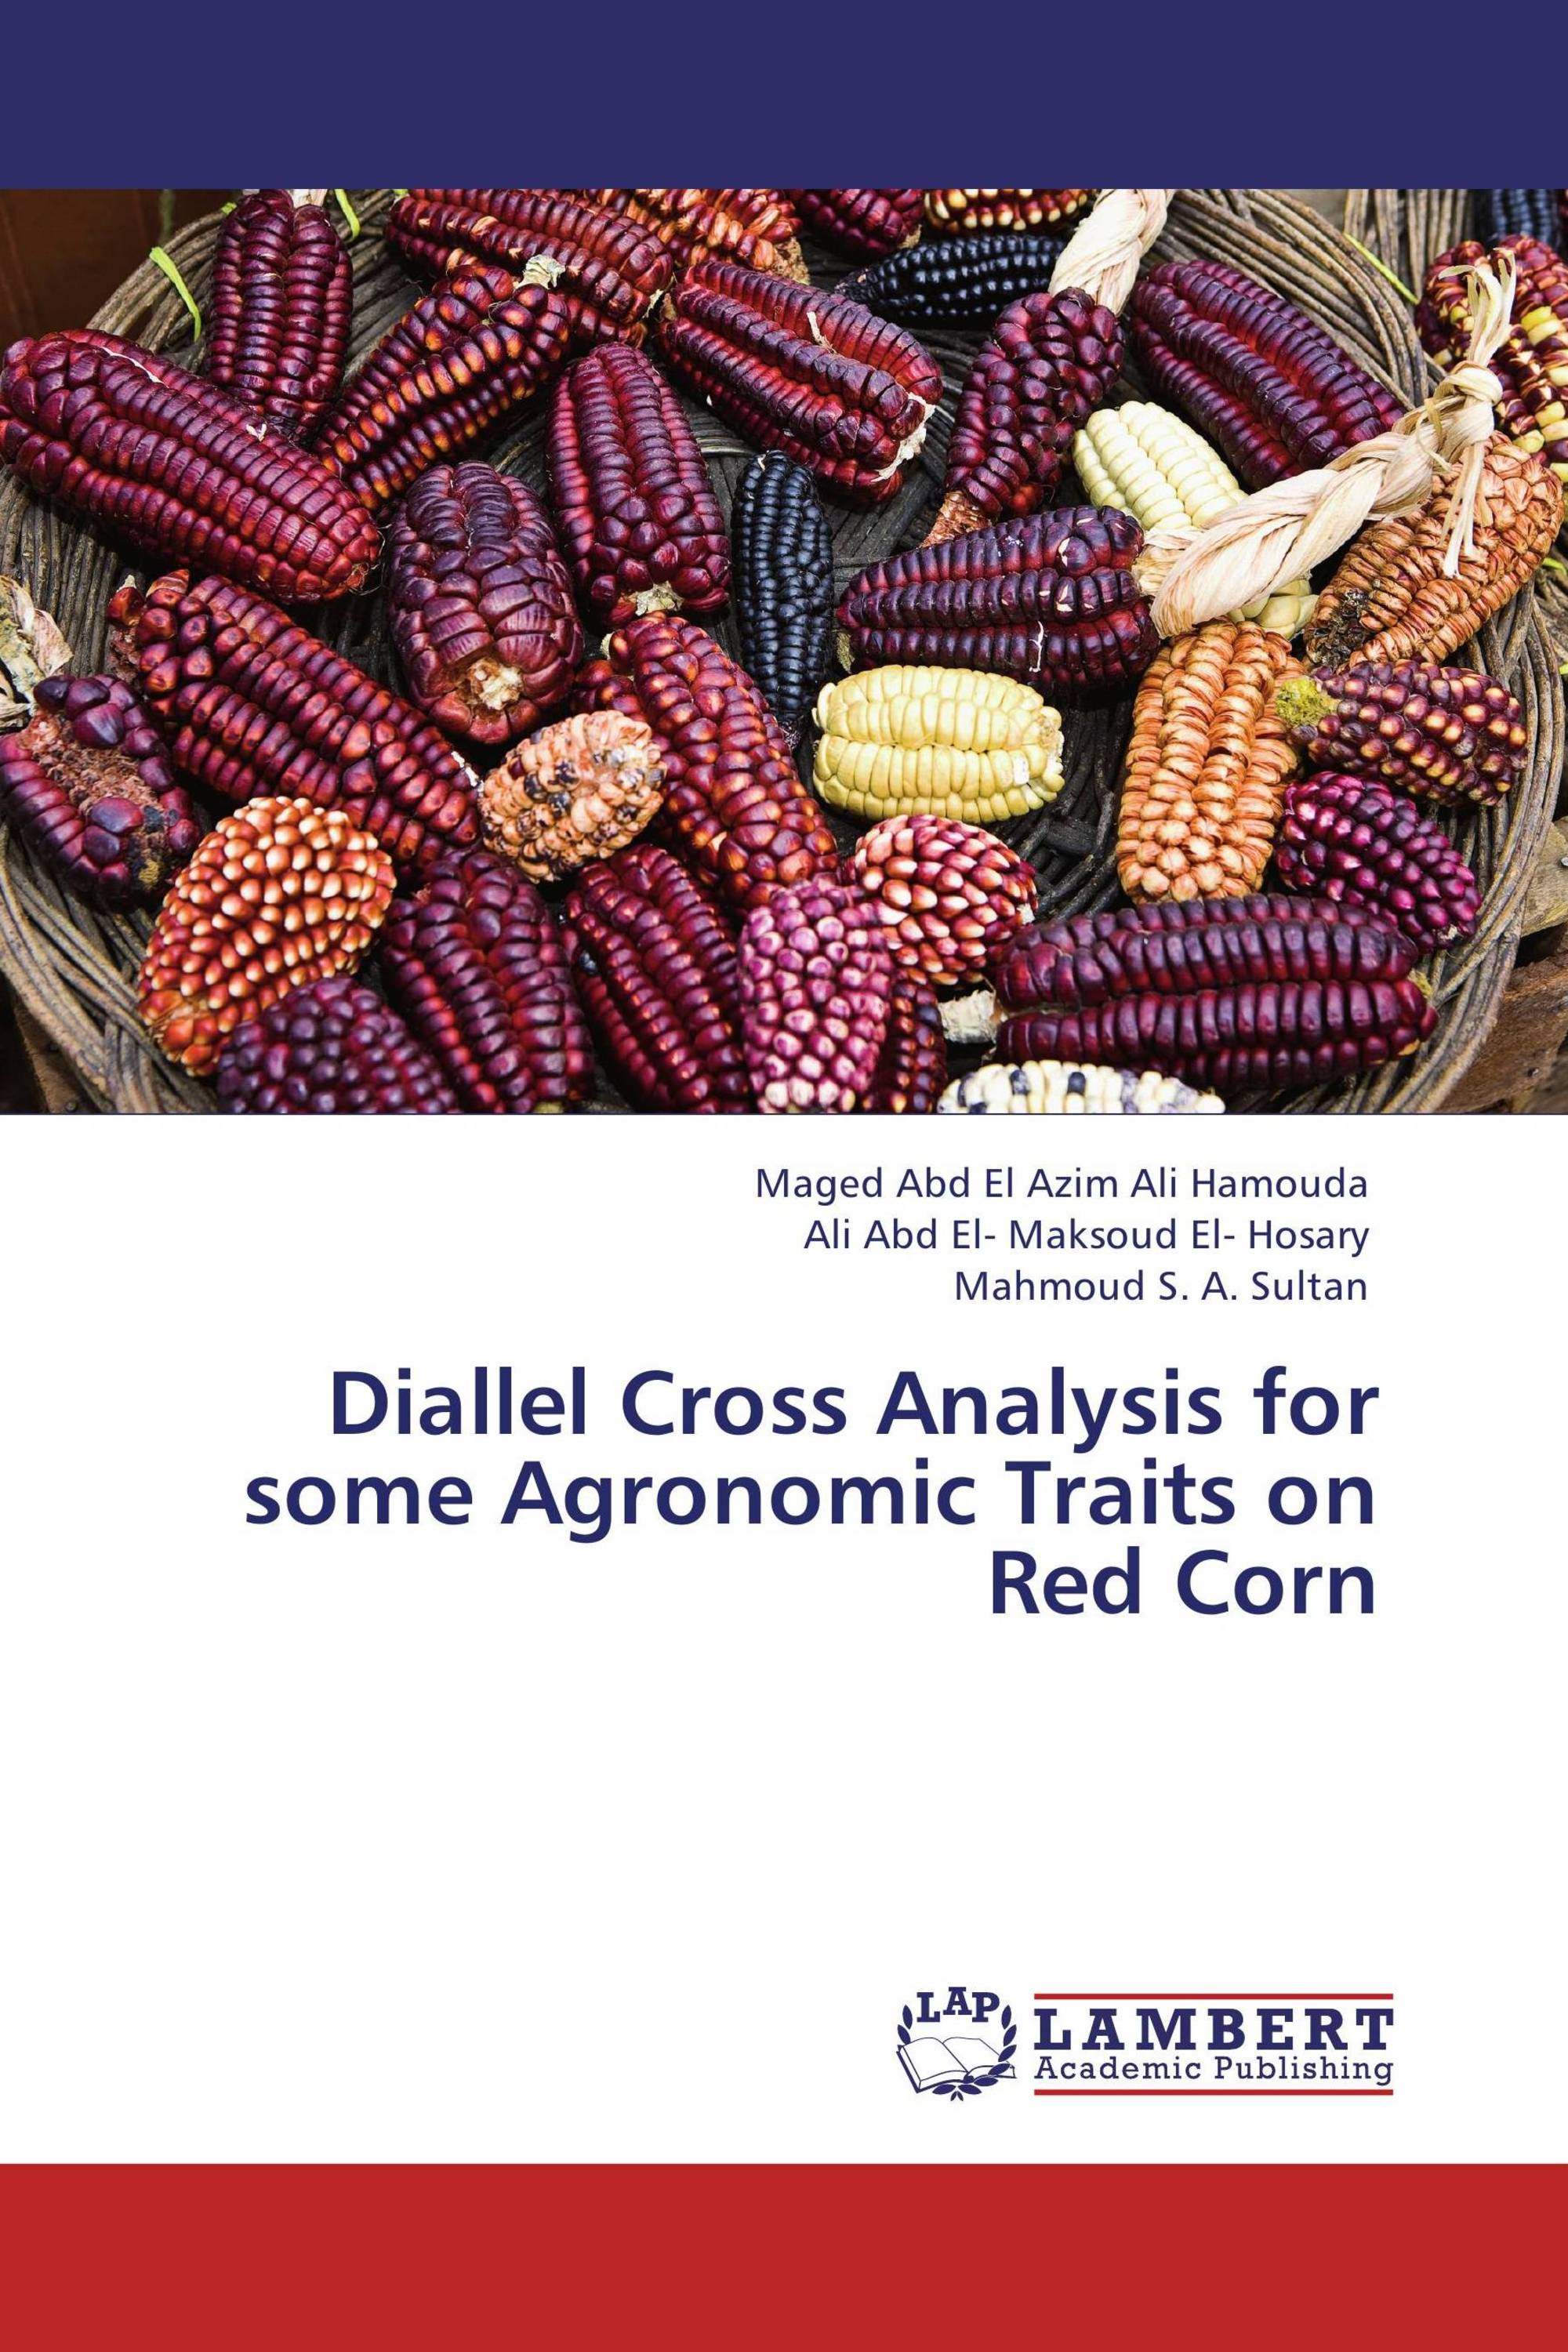 Diallel Cross Analysis For Some Agronomic Traits On Red Corn 978 3 8473 3882 6 9783847338826 